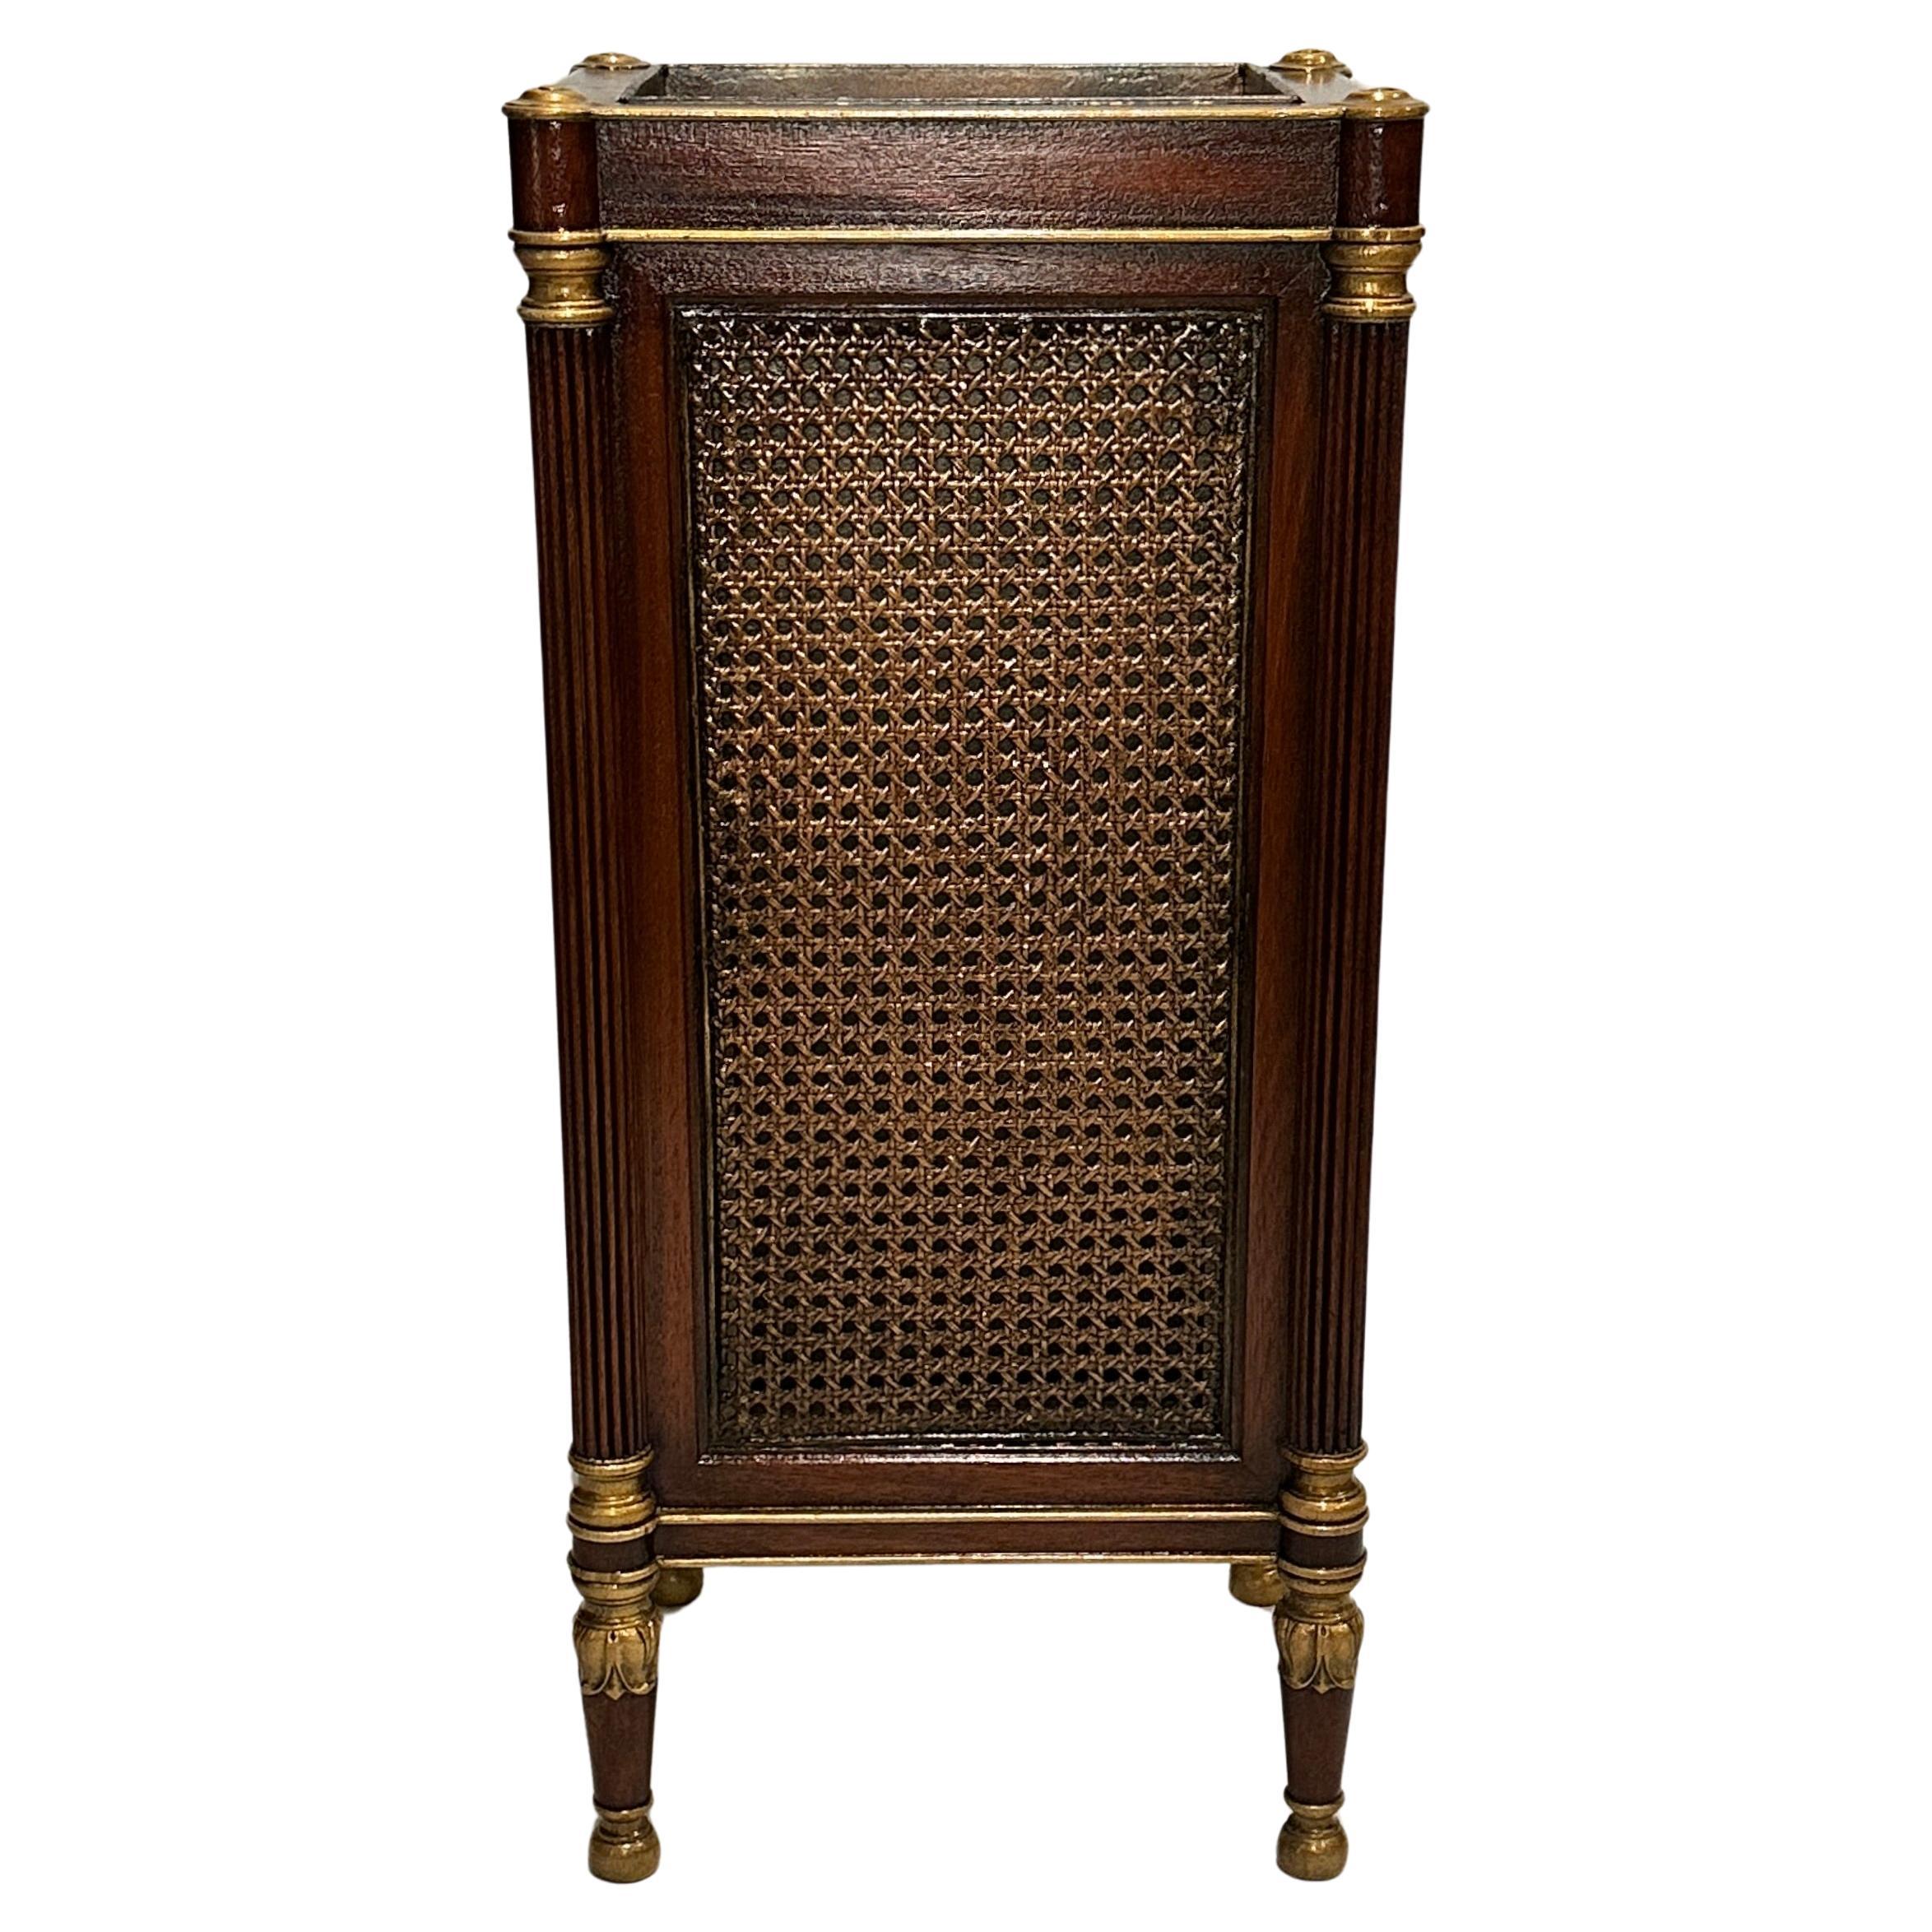 Regency Style Gilt And Cane Umbrella Stand